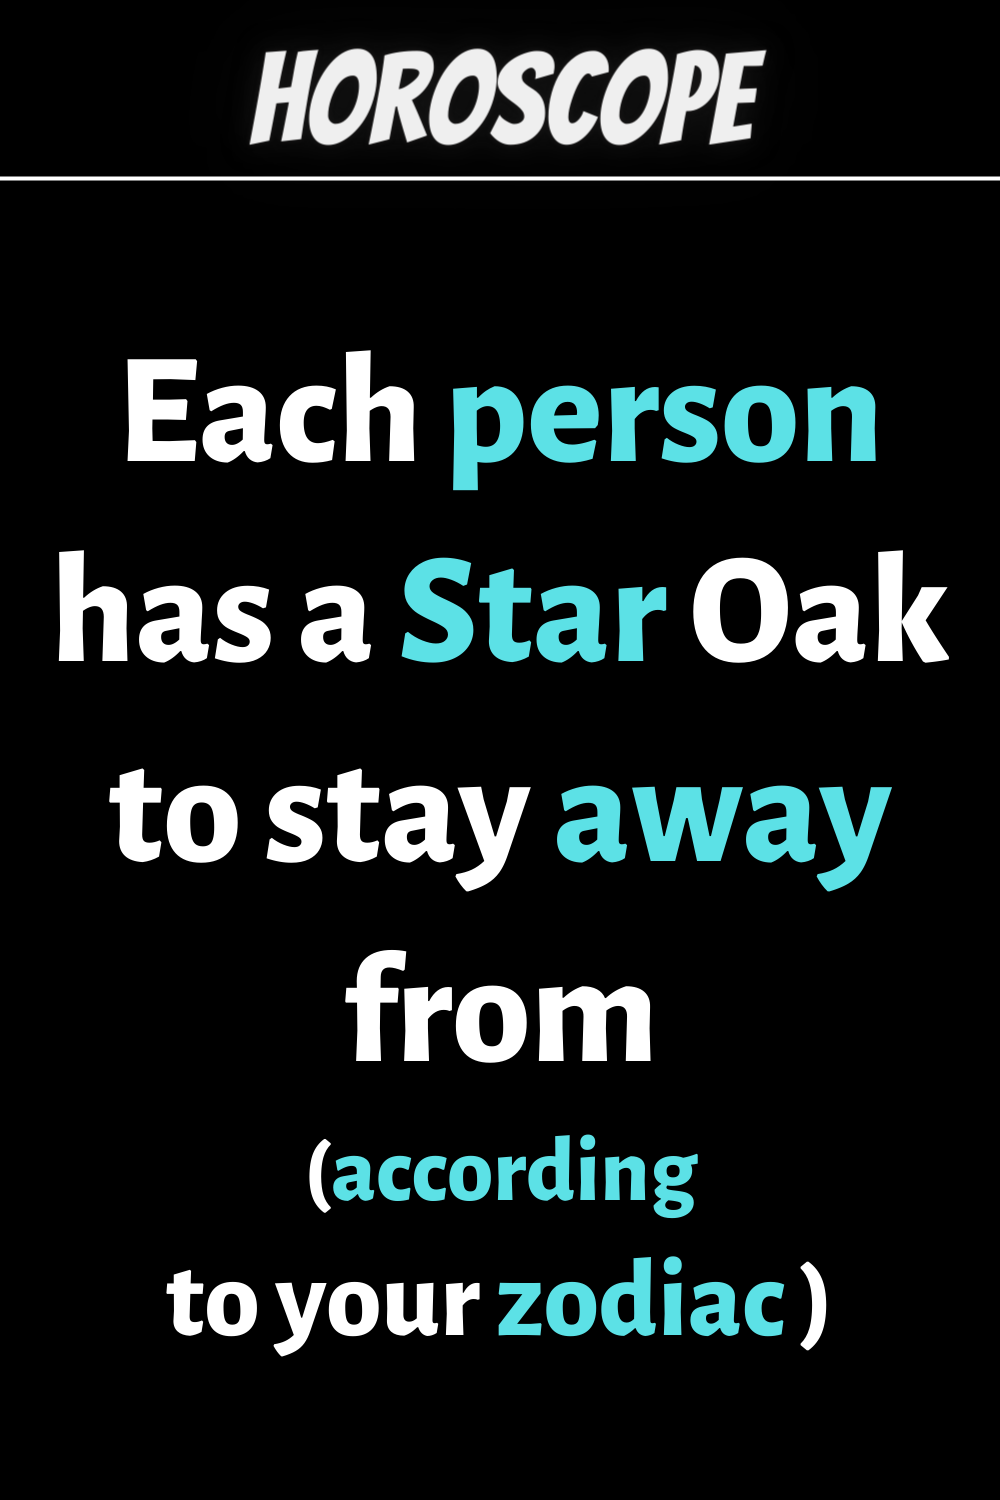 Each person has a Star Oak to stay away from (according to your zodiac sign)